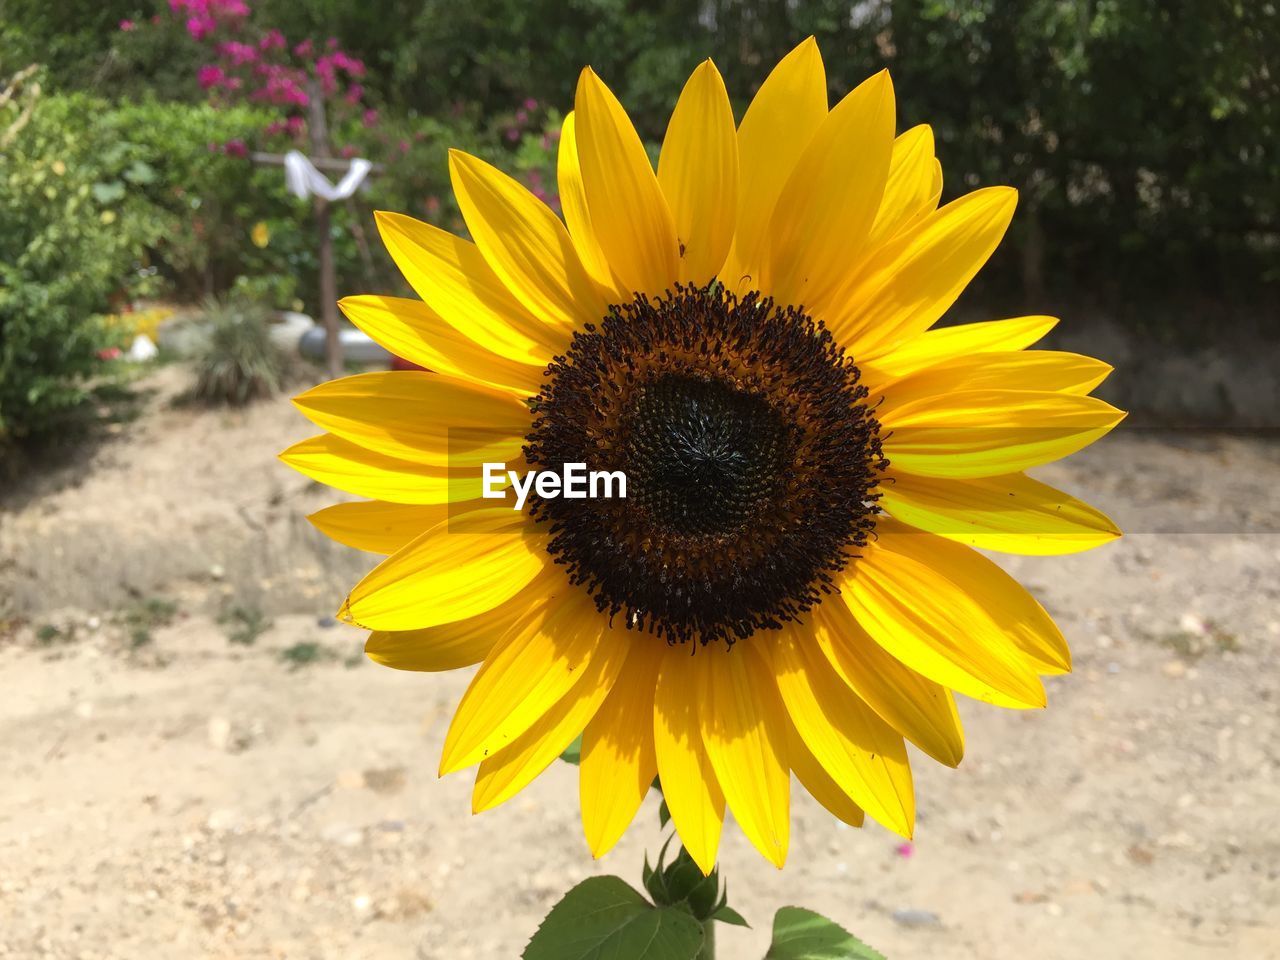 CLOSE-UP OF SUNFLOWERS ON YELLOW FLOWERING PLANT